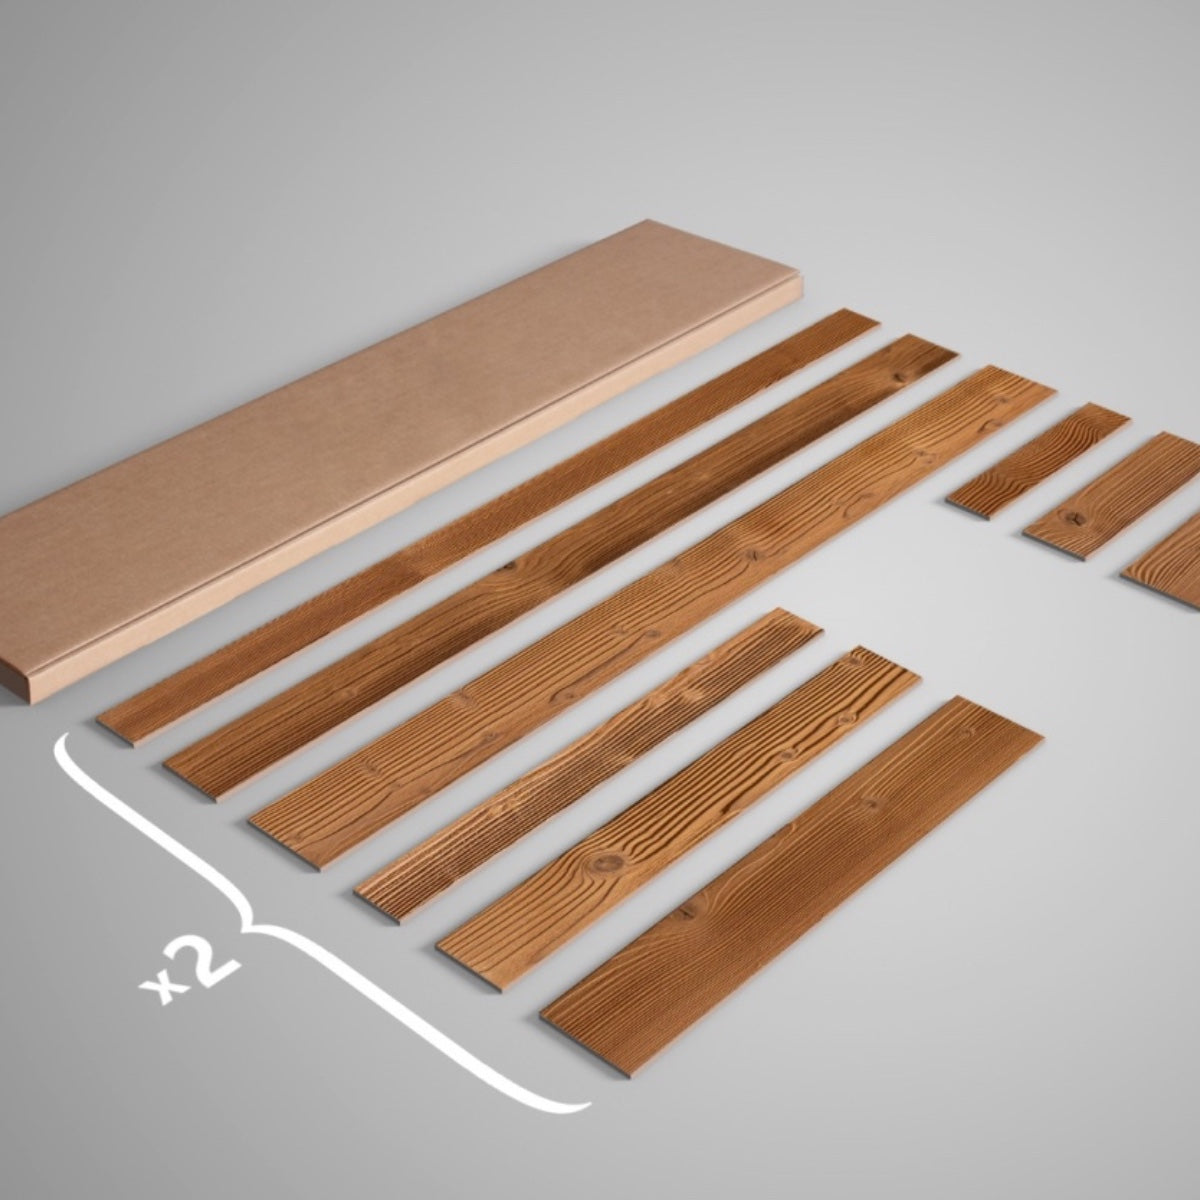 thermo planks packaging layout